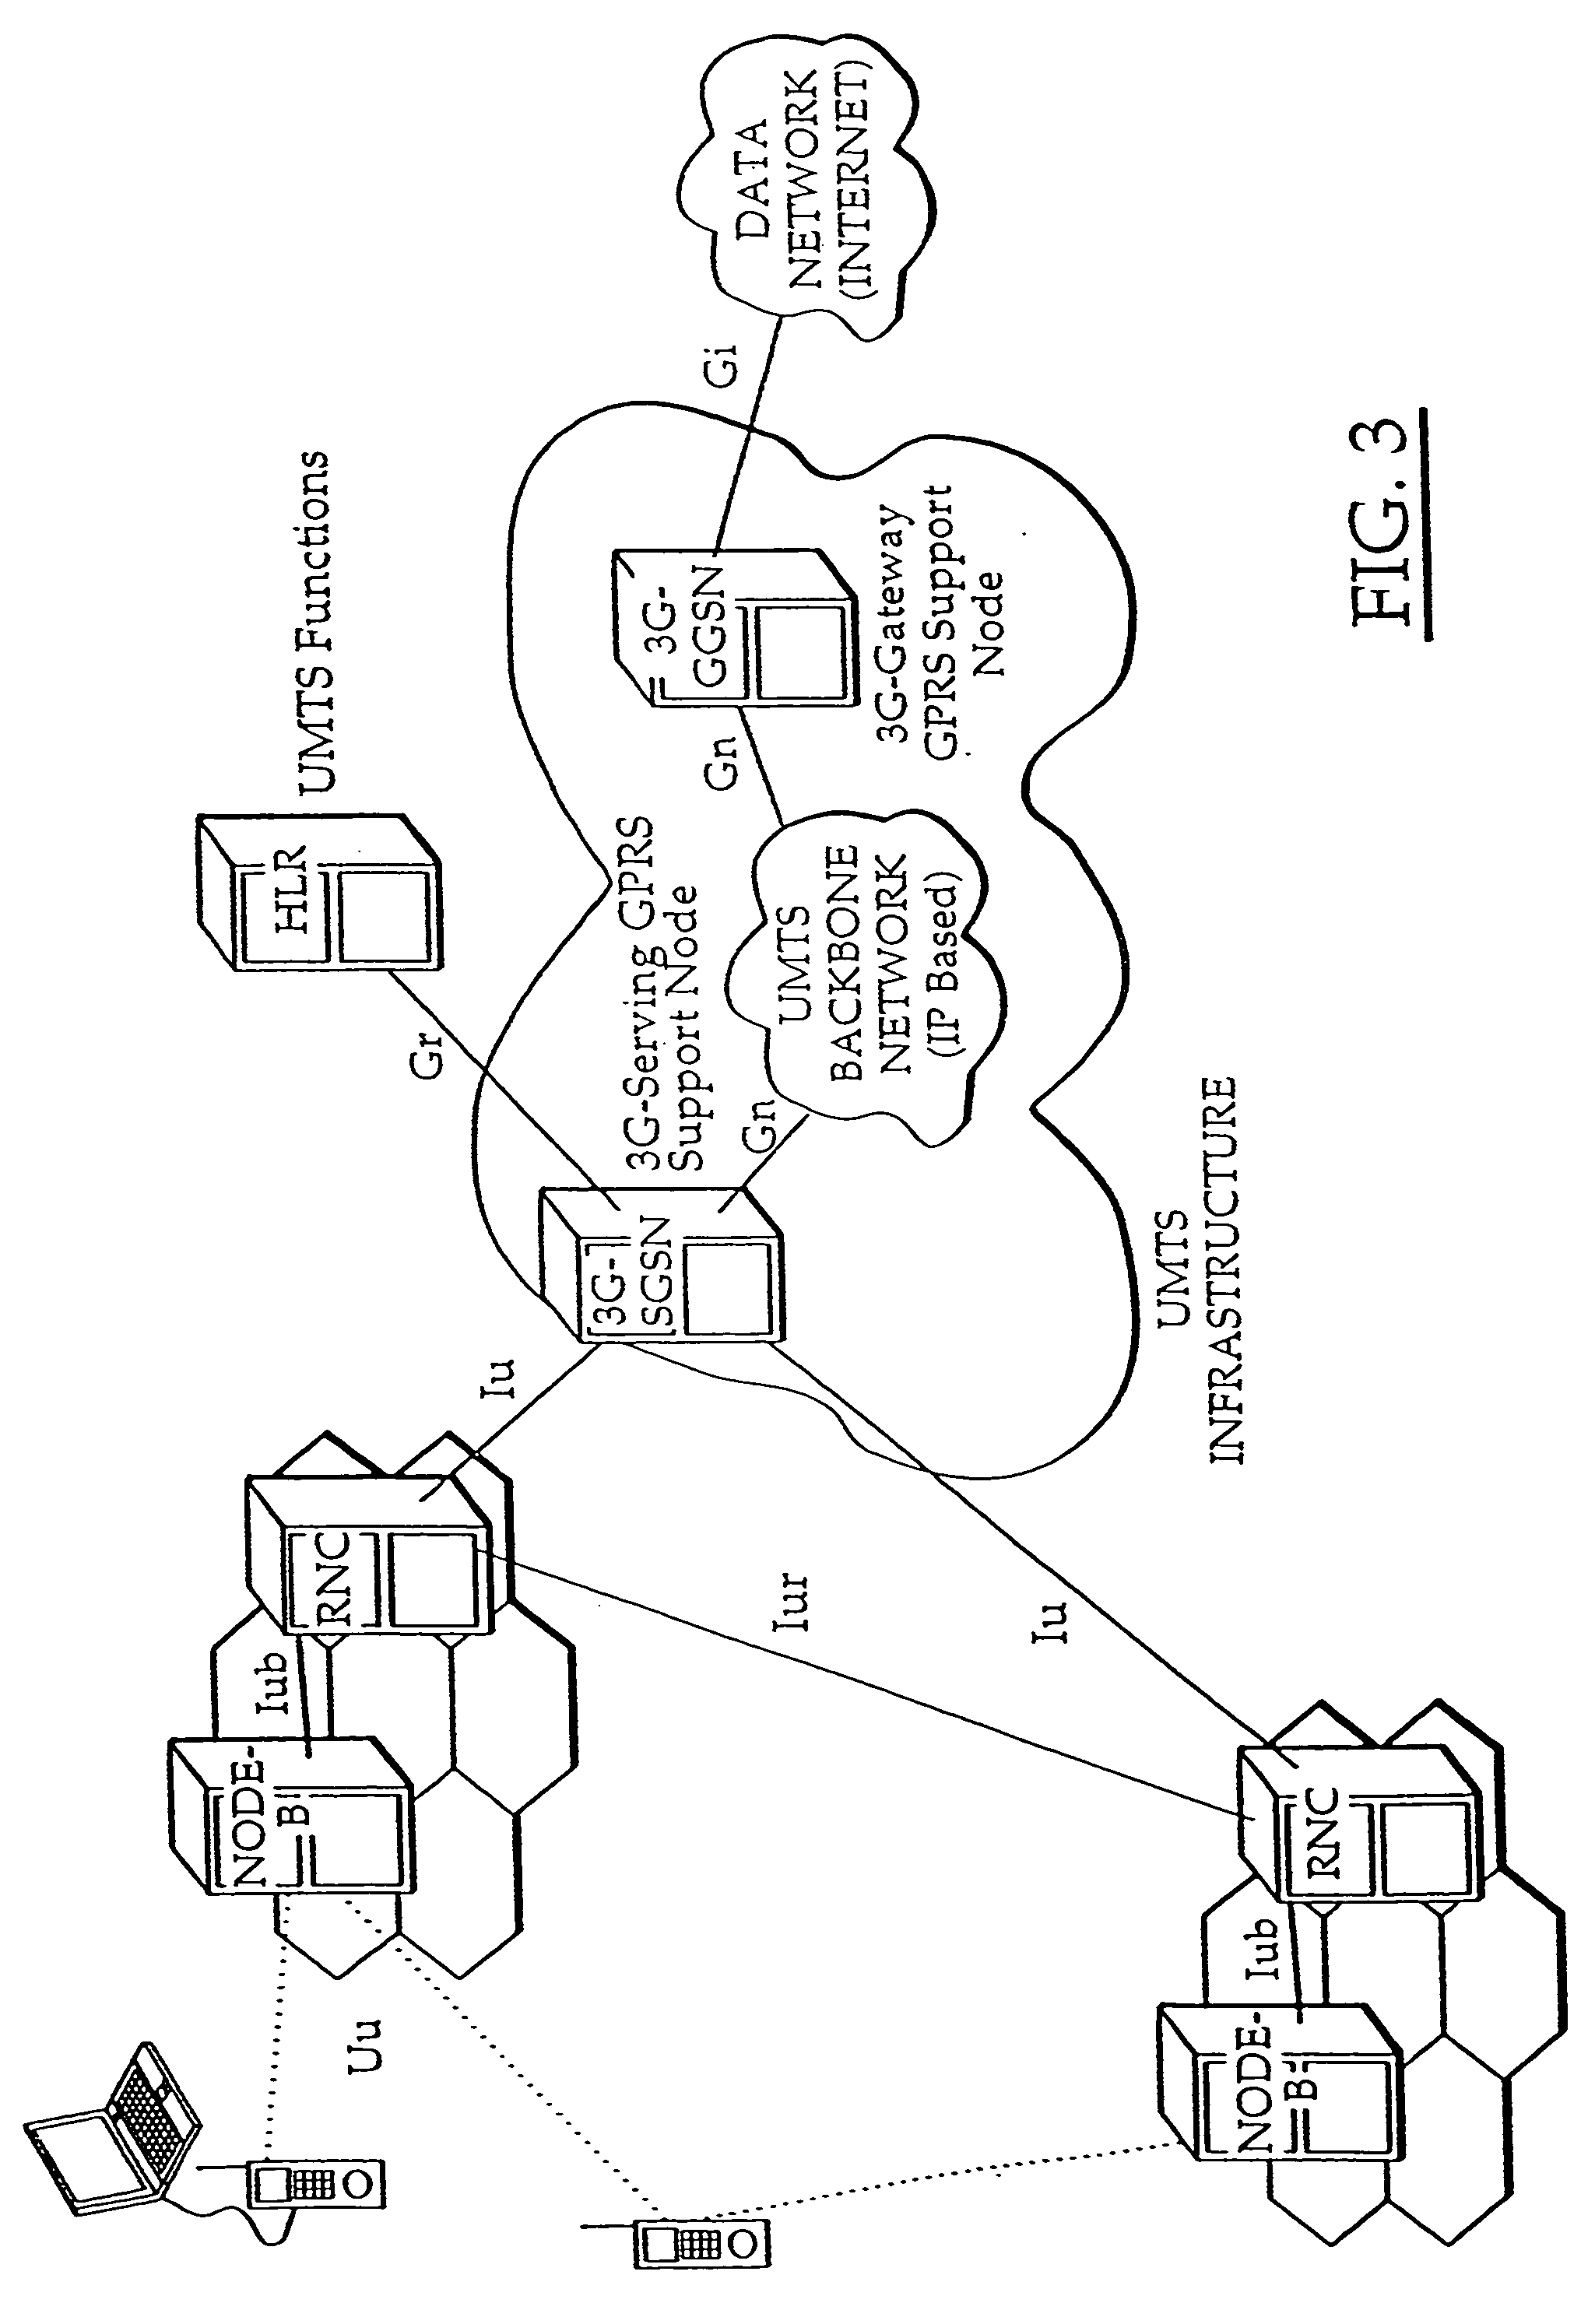 Method, apparatus, data structure, computer program, and system for providing appropriate QoS end-to-end for data crossing network boundaries